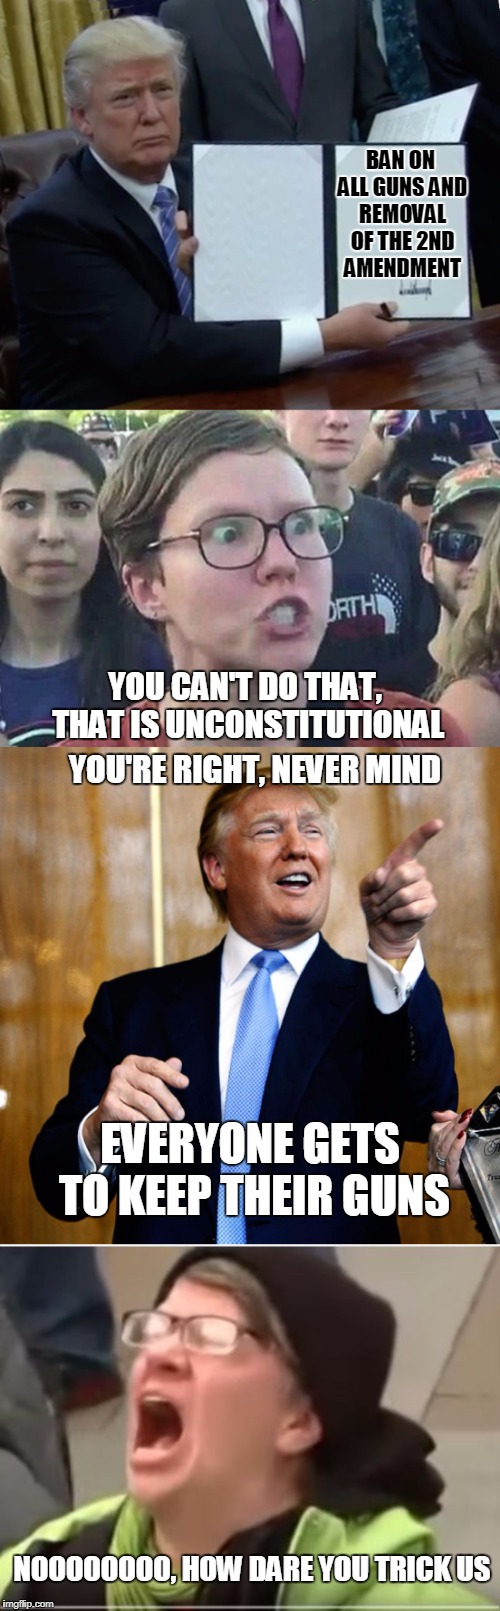 Trump Trumps the Liberals | BAN ON ALL GUNS AND REMOVAL OF THE 2ND AMENDMENT; YOU CAN'T DO THAT, THAT IS UNCONSTITUTIONAL; YOU'RE RIGHT, NEVER MIND; EVERYONE GETS TO KEEP THEIR GUNS; NOOOOOOOO, HOW DARE YOU TRICK US | image tagged in memes,executive orders,2nd amendment | made w/ Imgflip meme maker